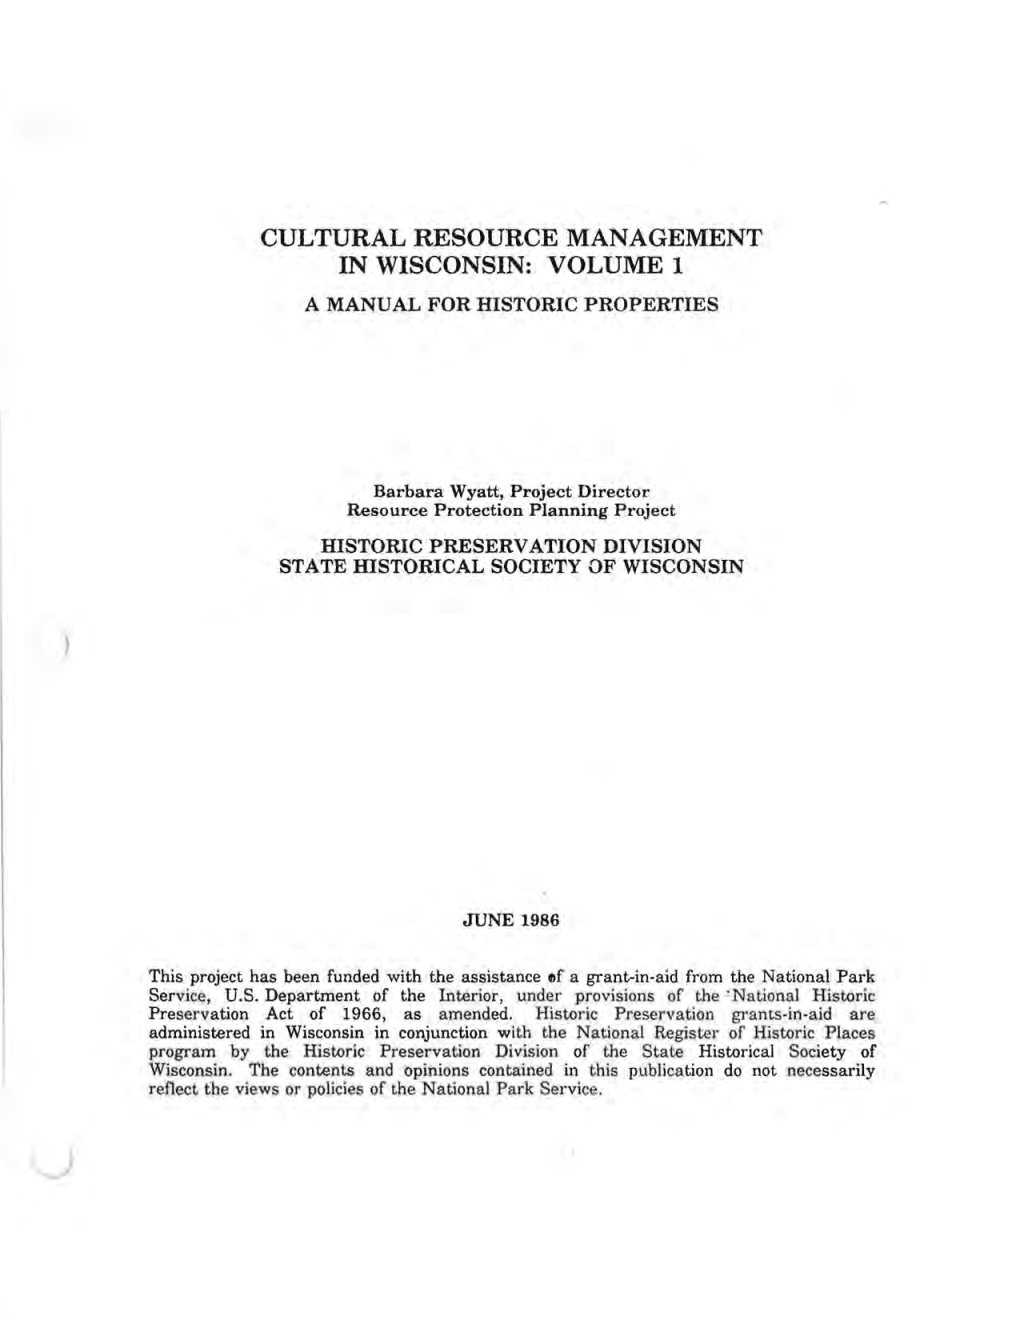 Cultural Resource Management in Wisconsin: Volume 1 a Manual for Historic Properties